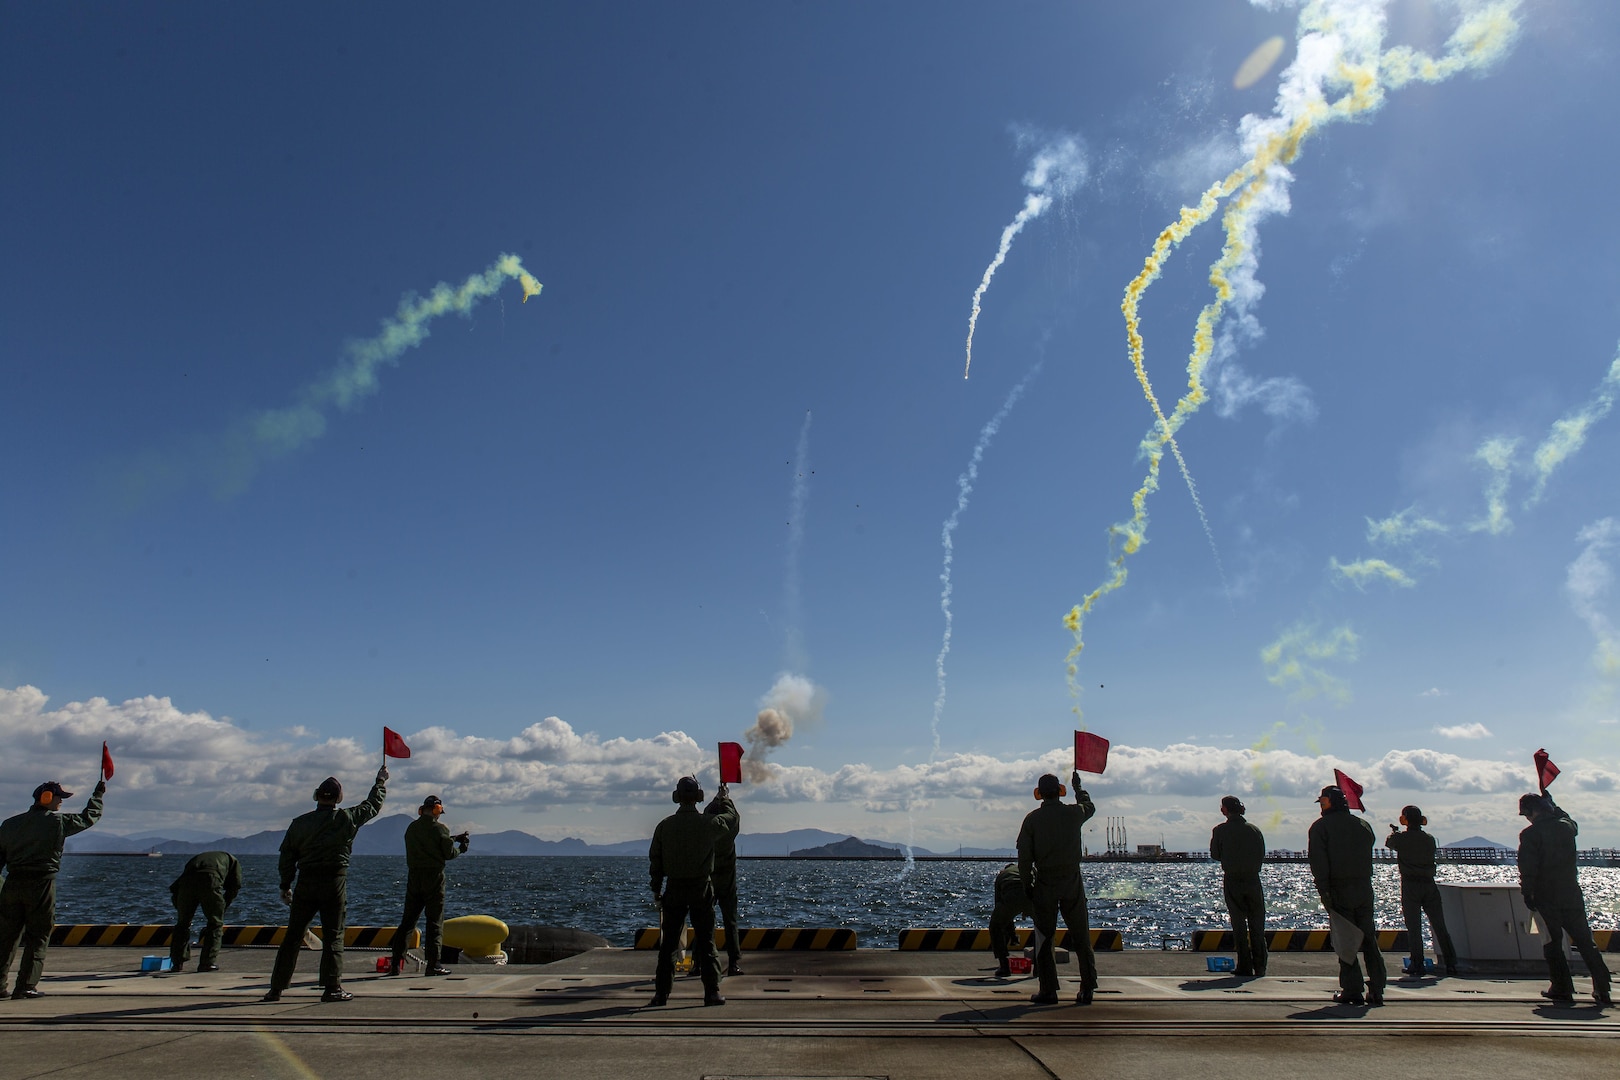 Japan Maritime Self-Defense Force aviators conduct flare-gun training during Winter Survival Training at Marine Corps Air Station Iwakuni, Japan, March 9-11, 2016. Mandatory for all aviators and aircrew, the JMSDF conducts this training semi-annually, once in the summer and once in the winter. JMSDF members started the training by firing off a flare-gun and a pencil-gun, which is a smaller version of a flare gun. (U.S. Marine Corps photo by Lance Cpl. Aaron Henson/Released)